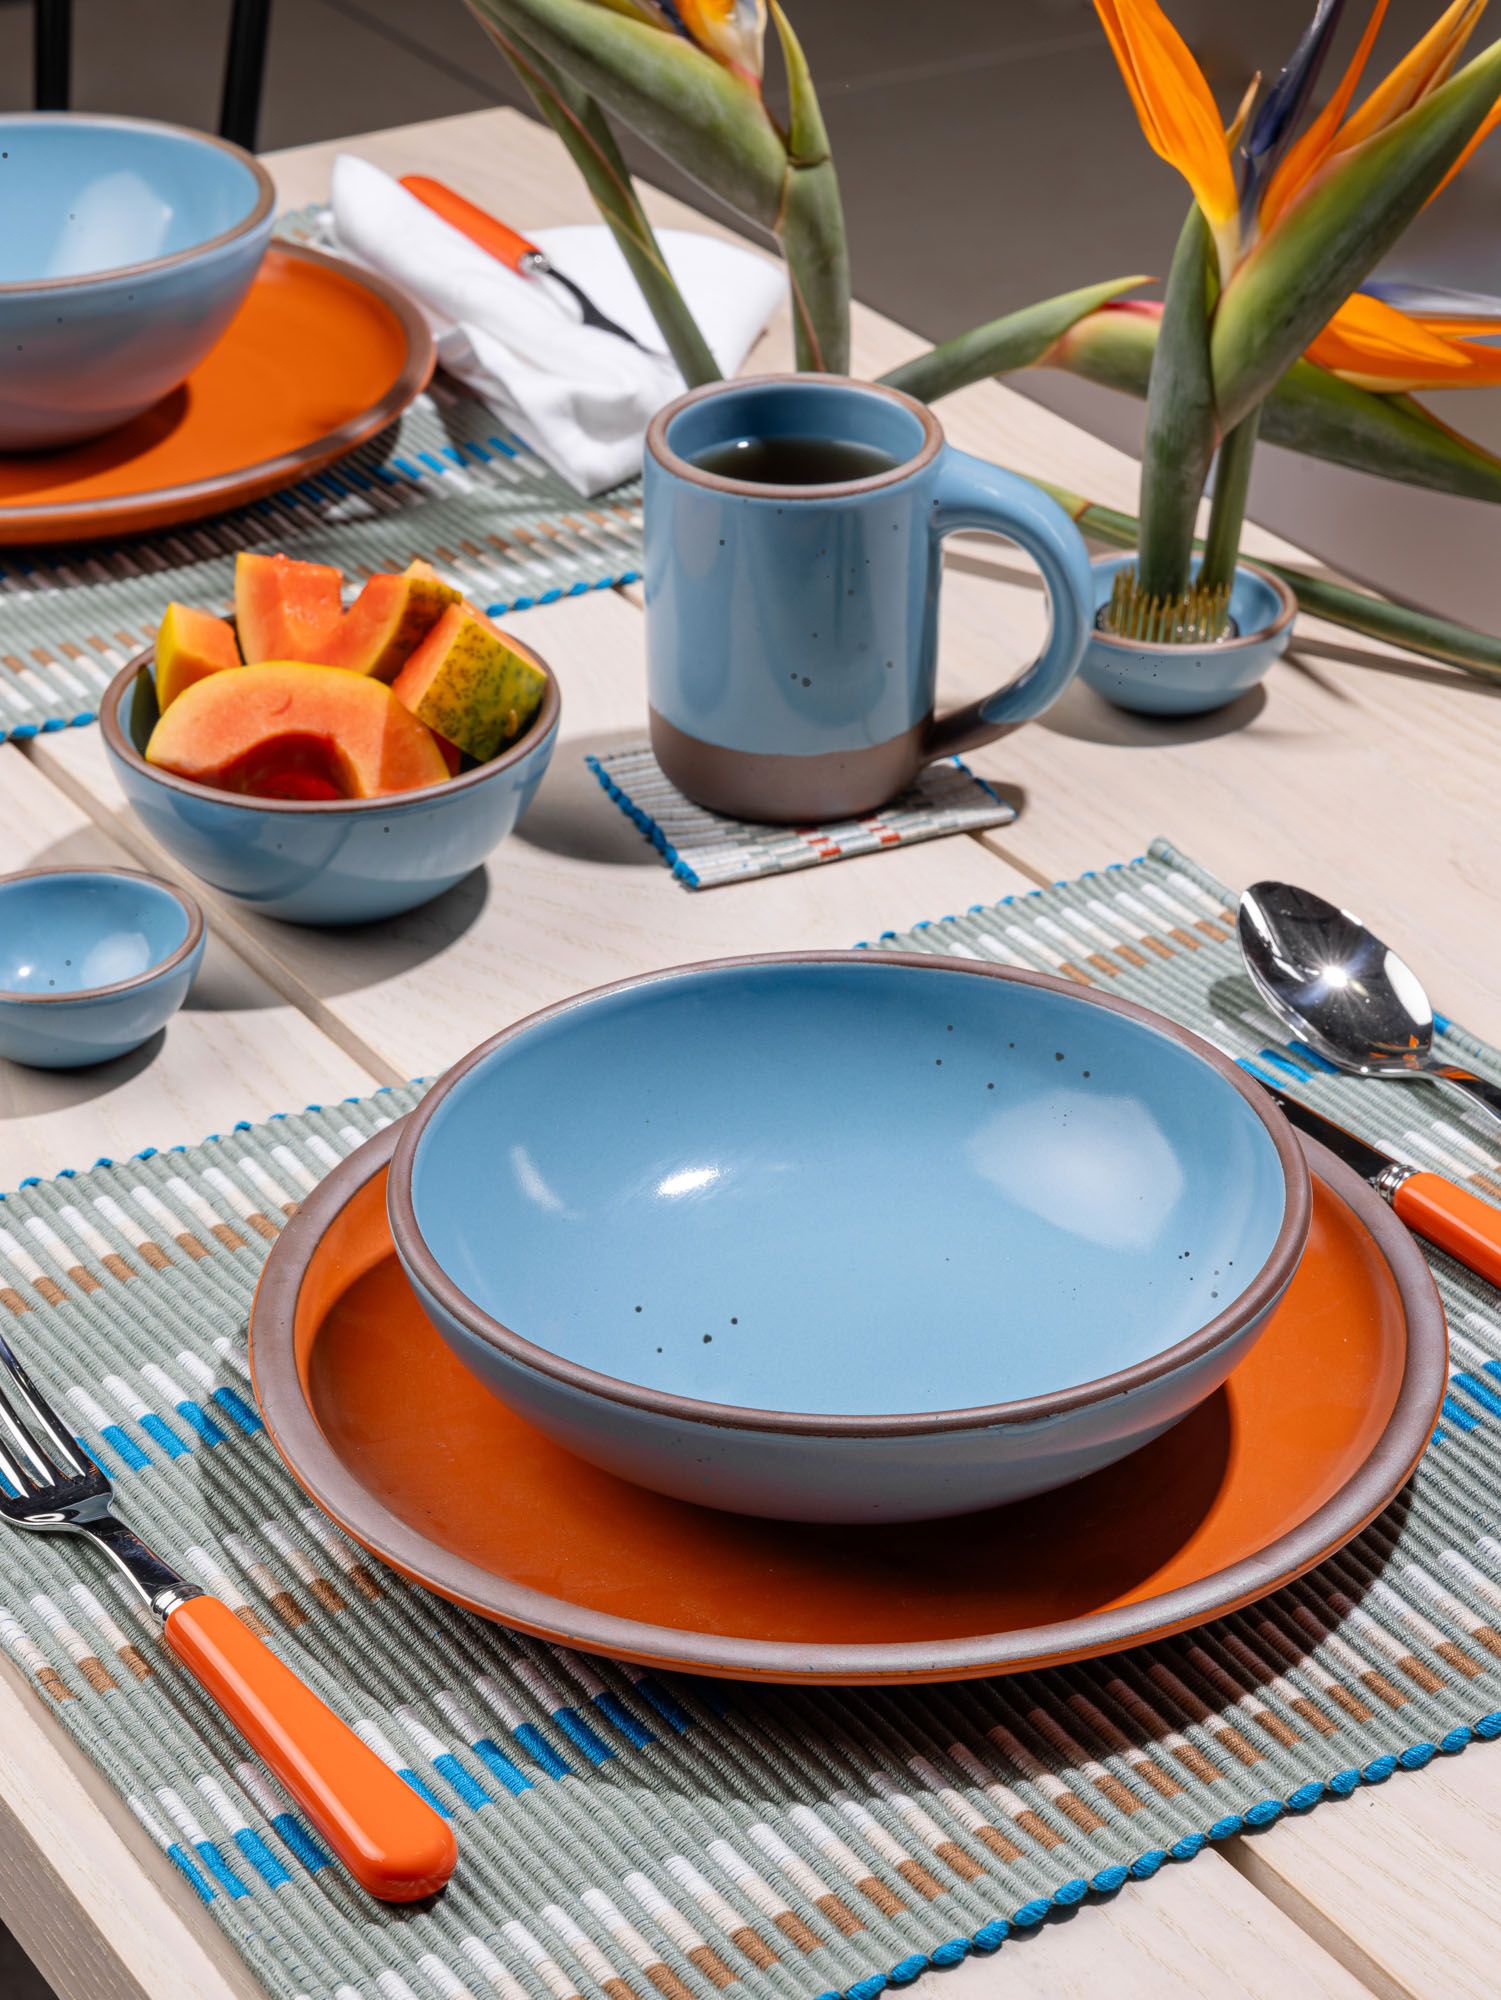 A shallow dinner bowl in a robin's egg blue color sits on a large dinner plate in a bold orange color.